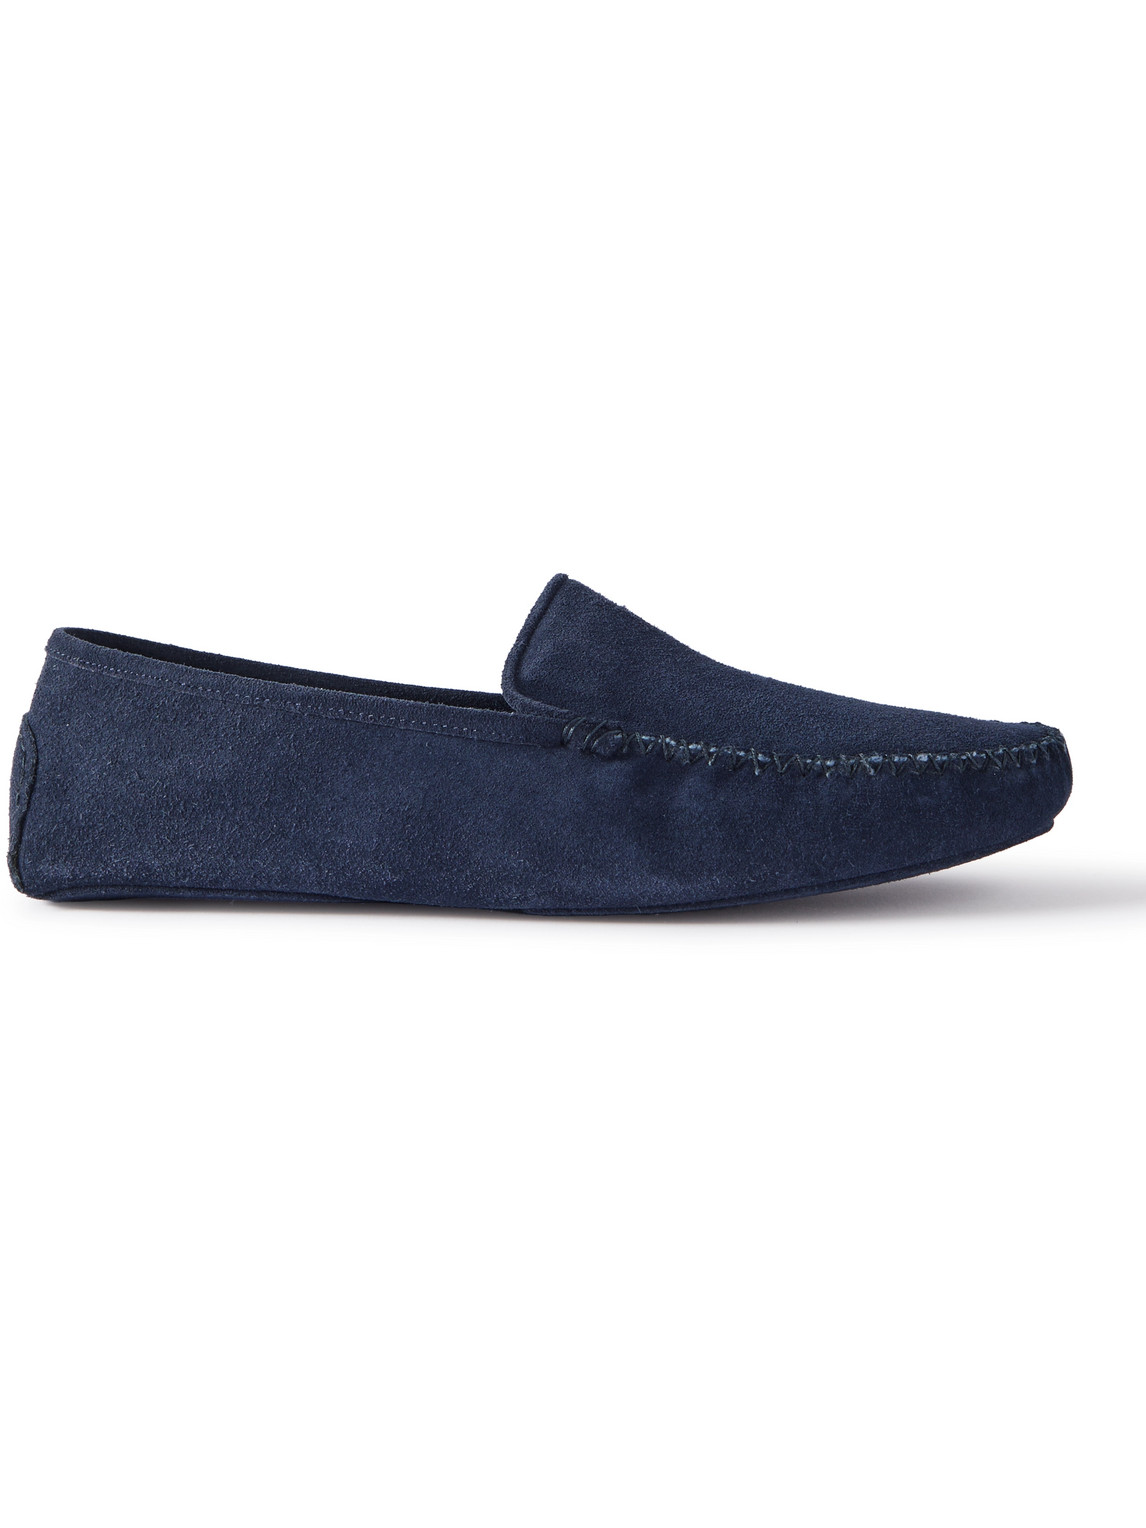 THOM SWEENEY CASHMERE-LINED SUEDE SLIPPERS